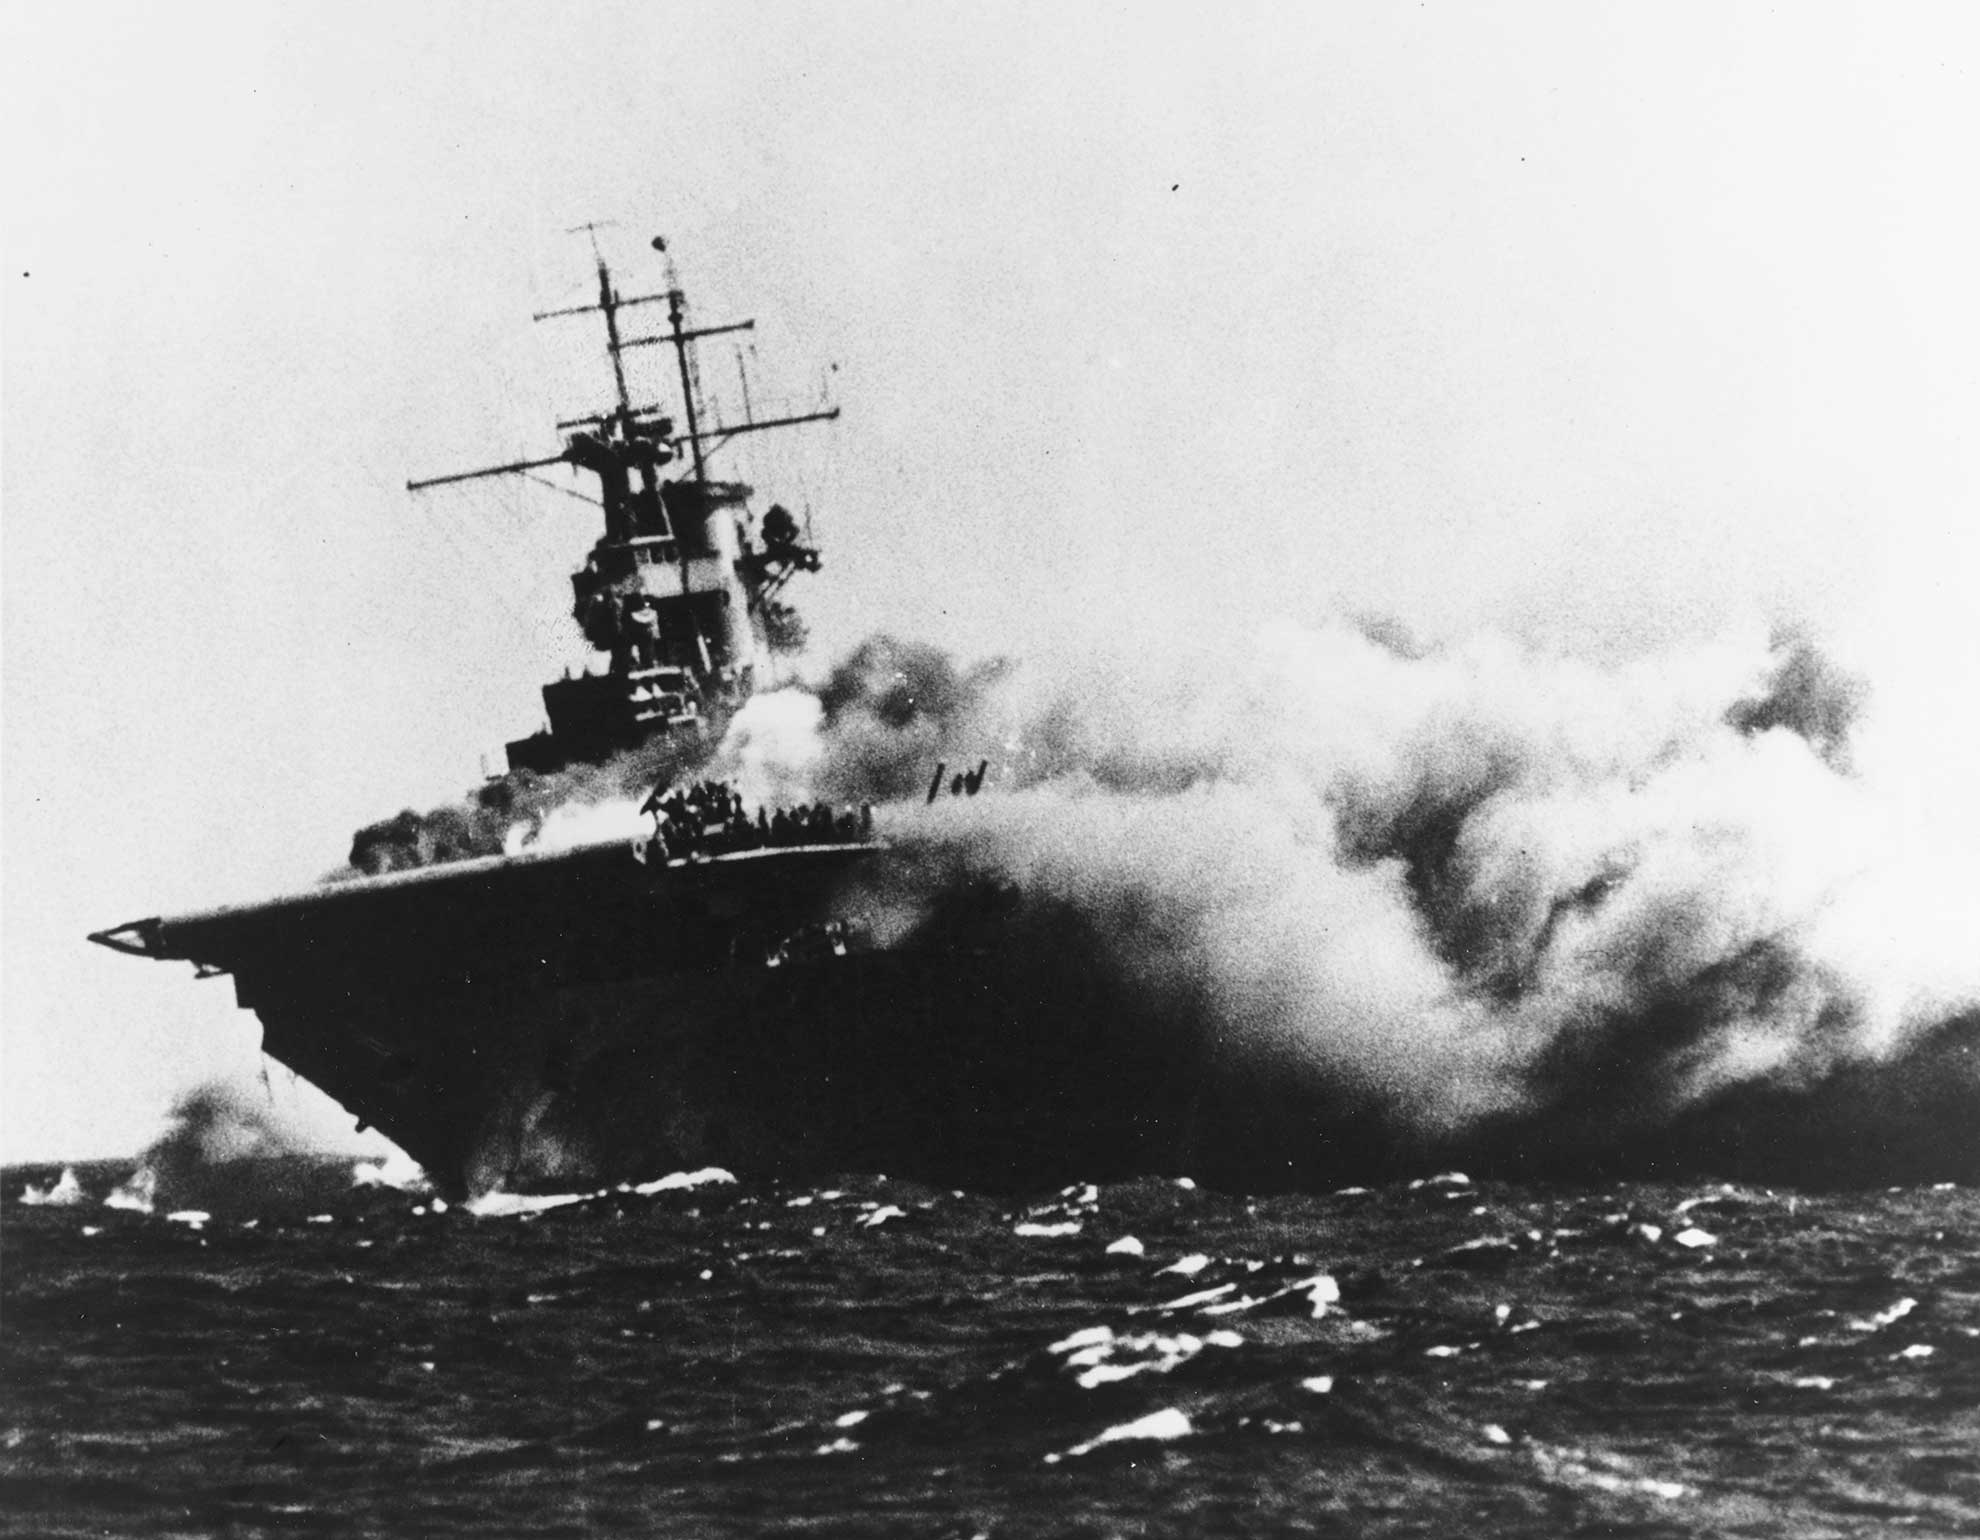 Wshington D.C. (March 14, 2019) The aircraft carrier USS Wasp (CV-7) is shown burning and listing after it was torpedoed by the Japanese navy submarine I-19 on Sept. 15, 1942 while operating in the Southwestern Pacific in support of forces on Guadalcanal -- U.S. Navy photo courtesy of the National Archives. -